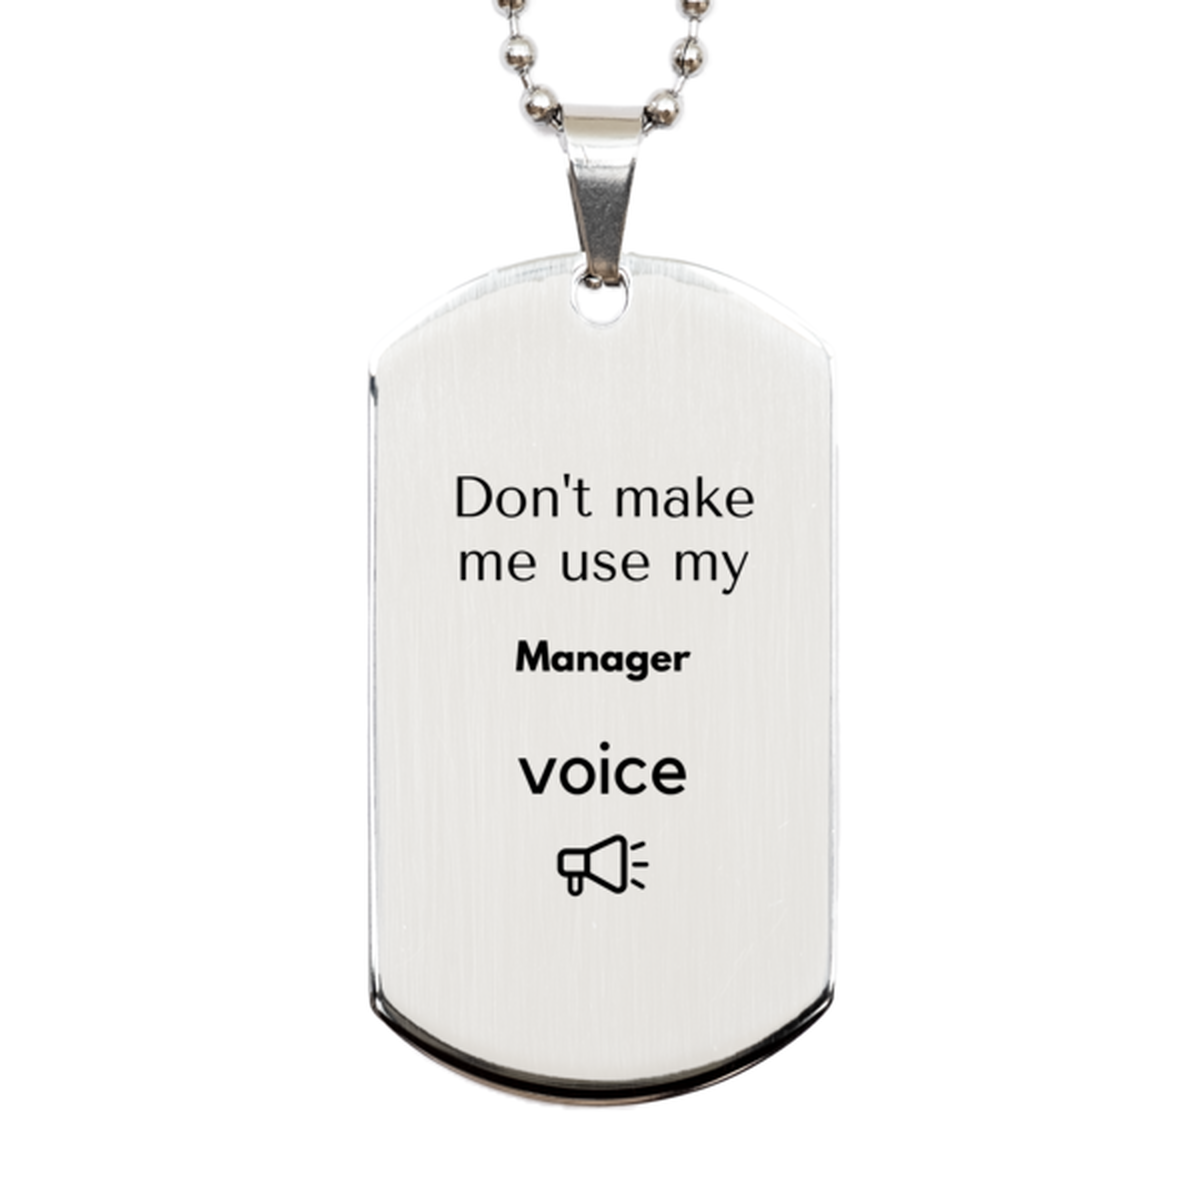 Don't make me use my Manager voice, Sarcasm Manager Gifts, Christmas Manager Silver Dog Tag Birthday Unique Gifts For Manager Coworkers, Men, Women, Colleague, Friends